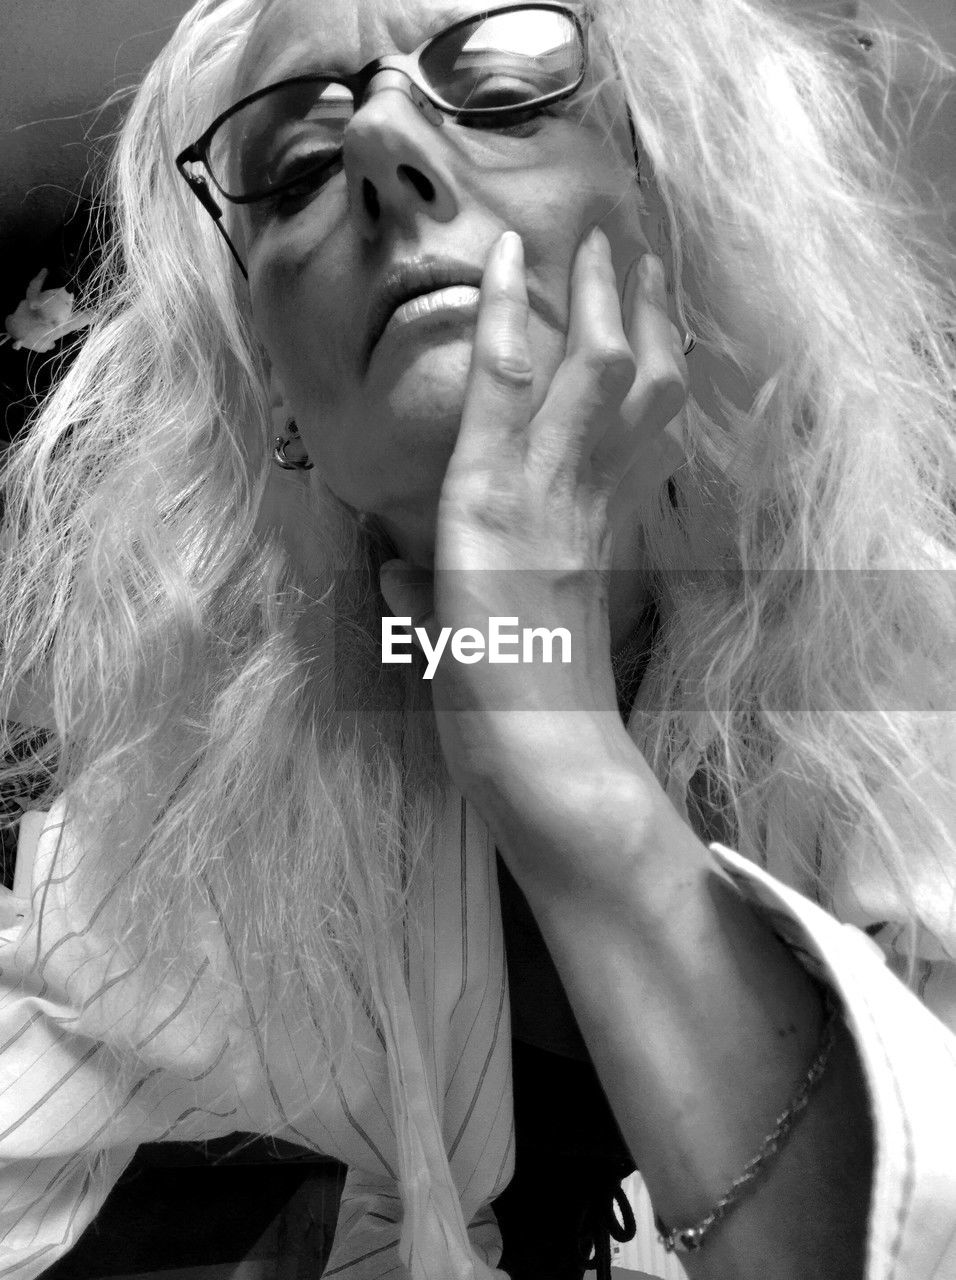 white, adult, women, one person, black and white, glasses, black, portrait, monochrome photography, fashion, sunglasses, monochrome, female, long hair, blond hair, hairstyle, lifestyles, headshot, young adult, person, eyewear, human face, vision care, leisure activity, eyeglasses, front view, photo shoot